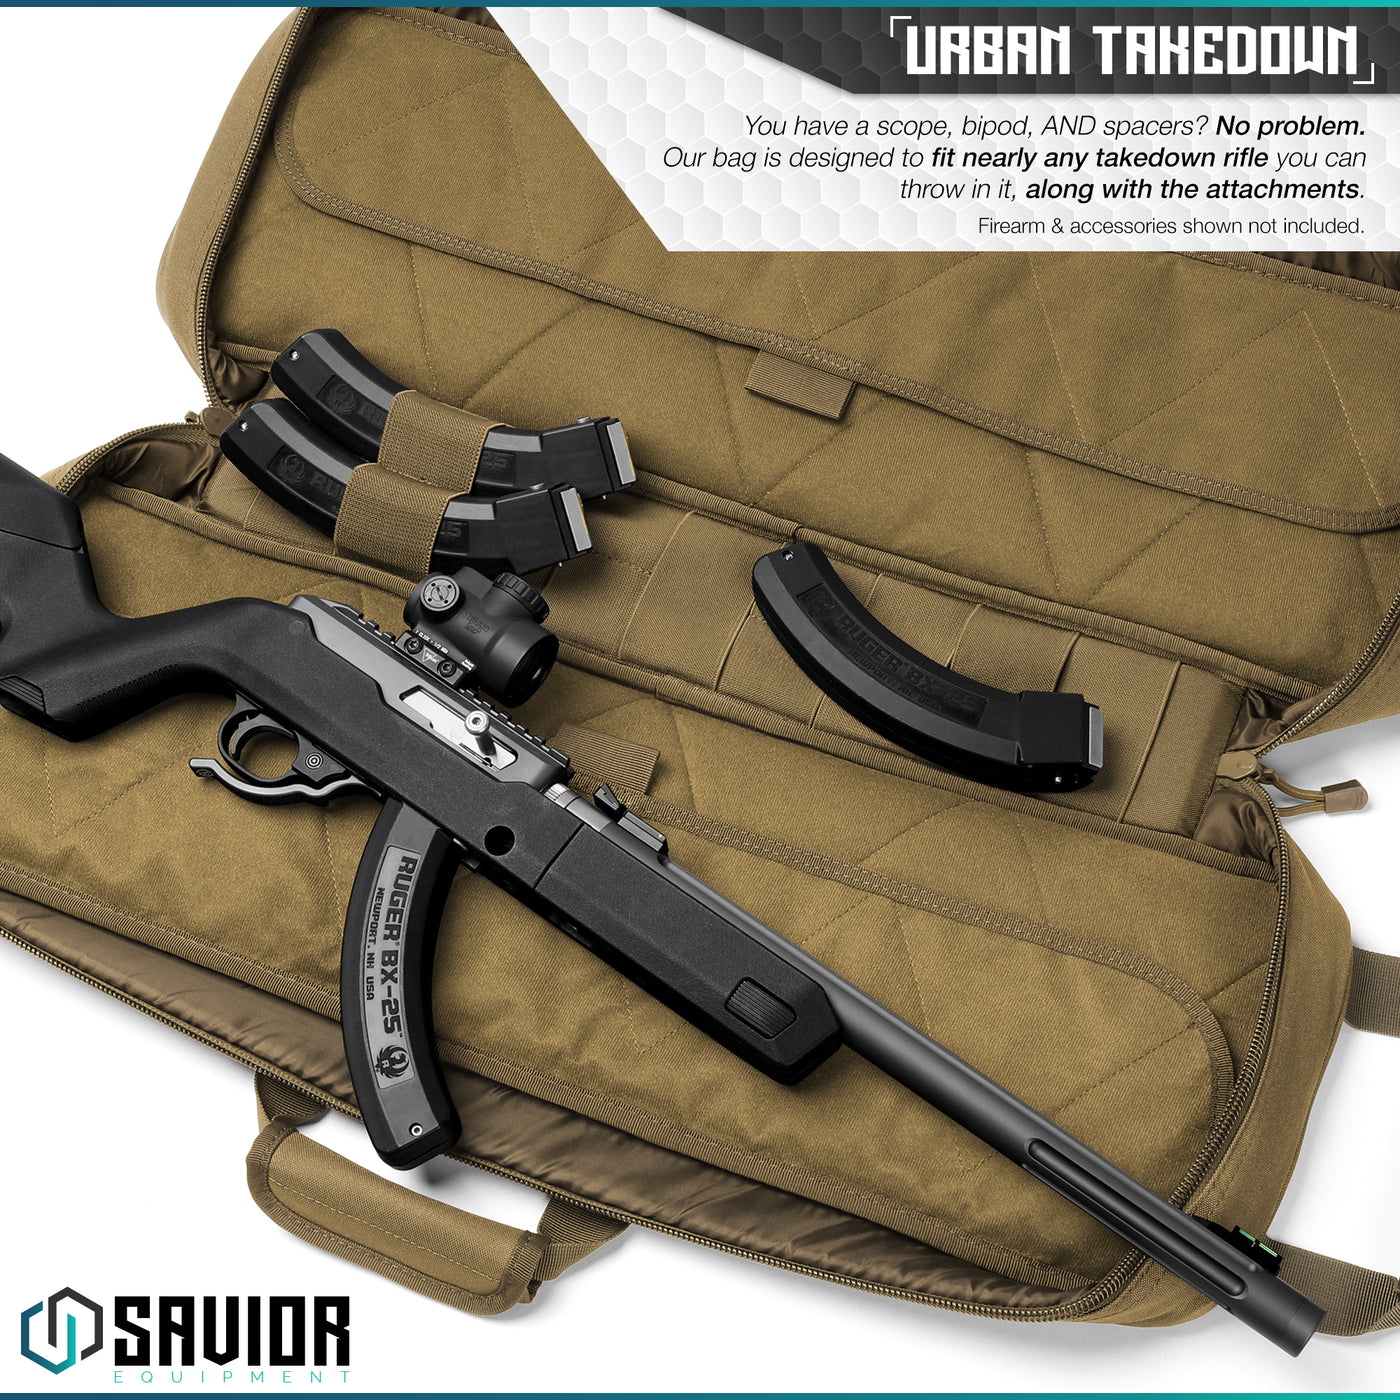 Urban Takedown - You have a scope, bipod, and spacers? No Problem. Our bag is designed to fit nearly any takedown rifle you can throw in it, along with the attachments. Firearms & accessories shown not included.